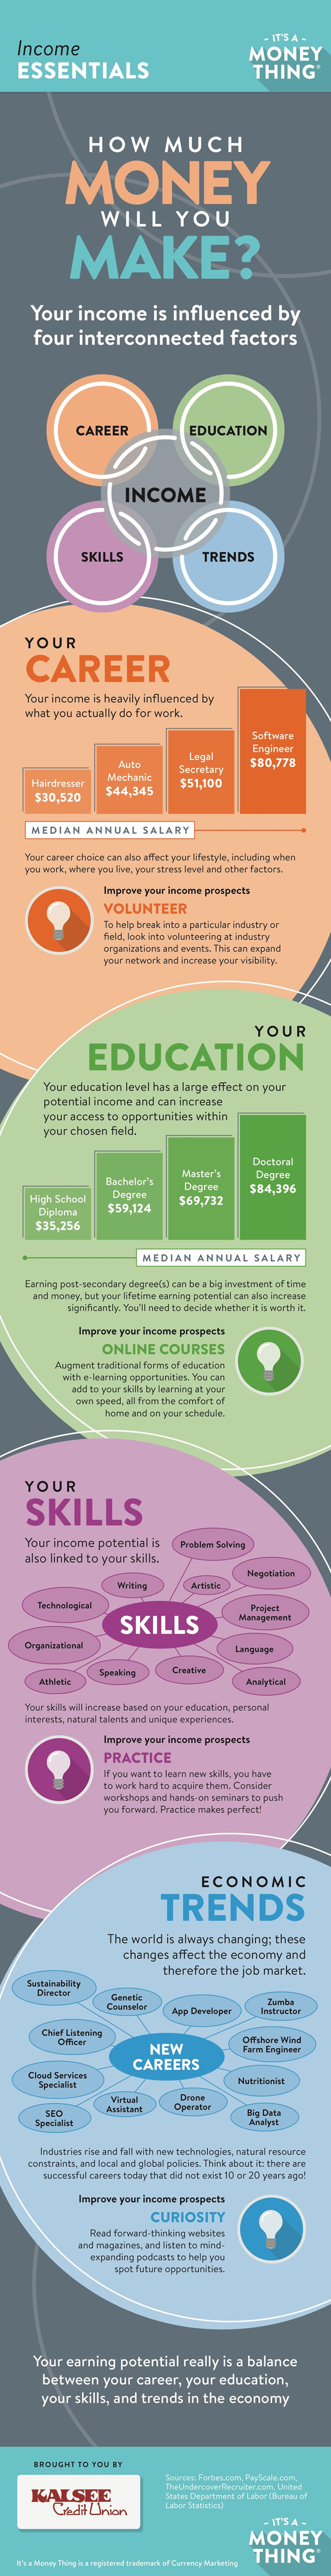 challenges of choosing a career infographic, click for transcription